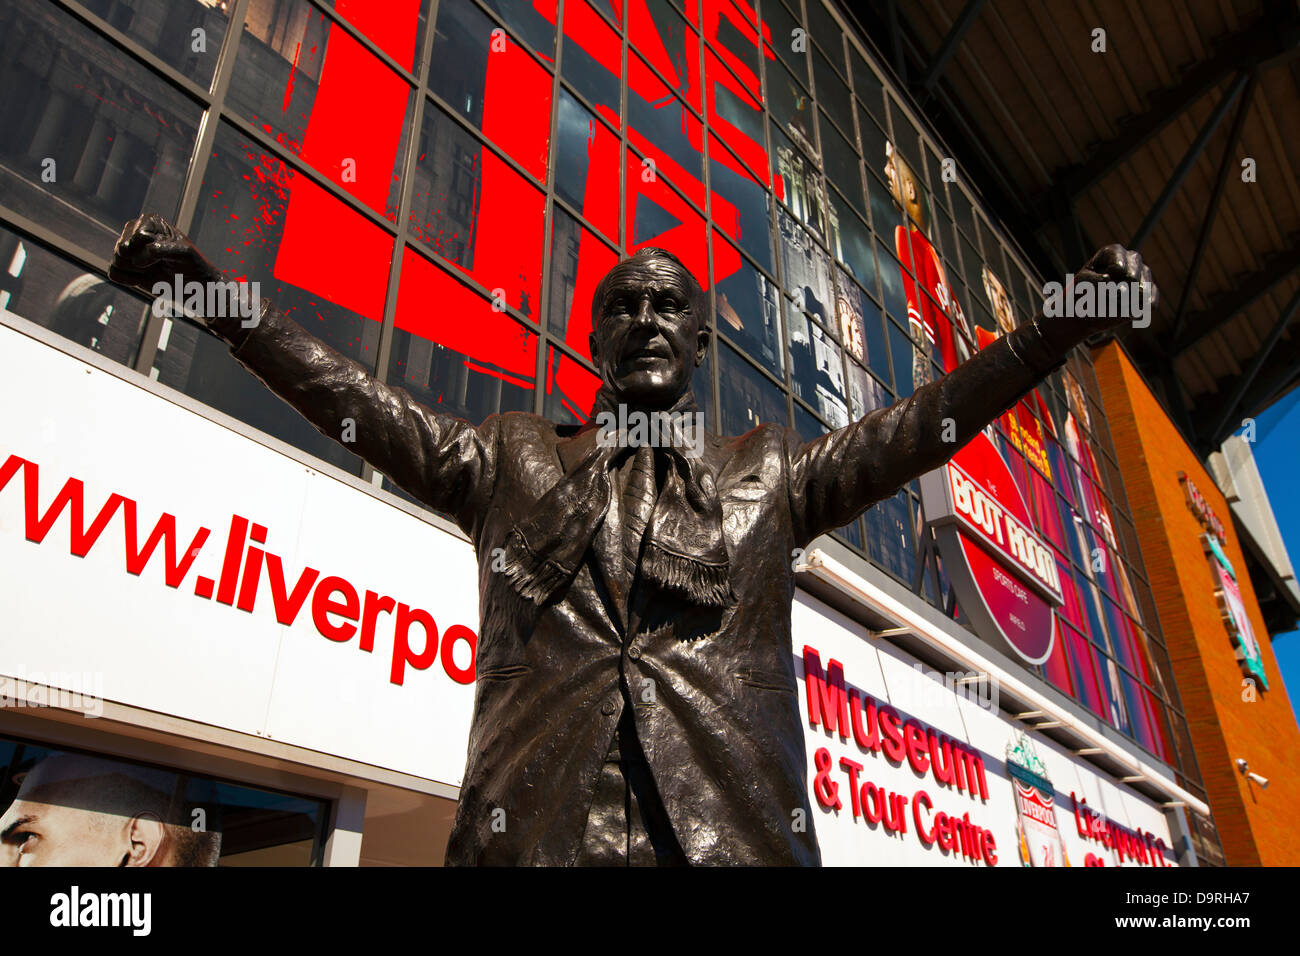 Bill Shankey statue at the Anfield stadium home to Liverpool Football Club one of the English Premier League F.C. Stock Photo